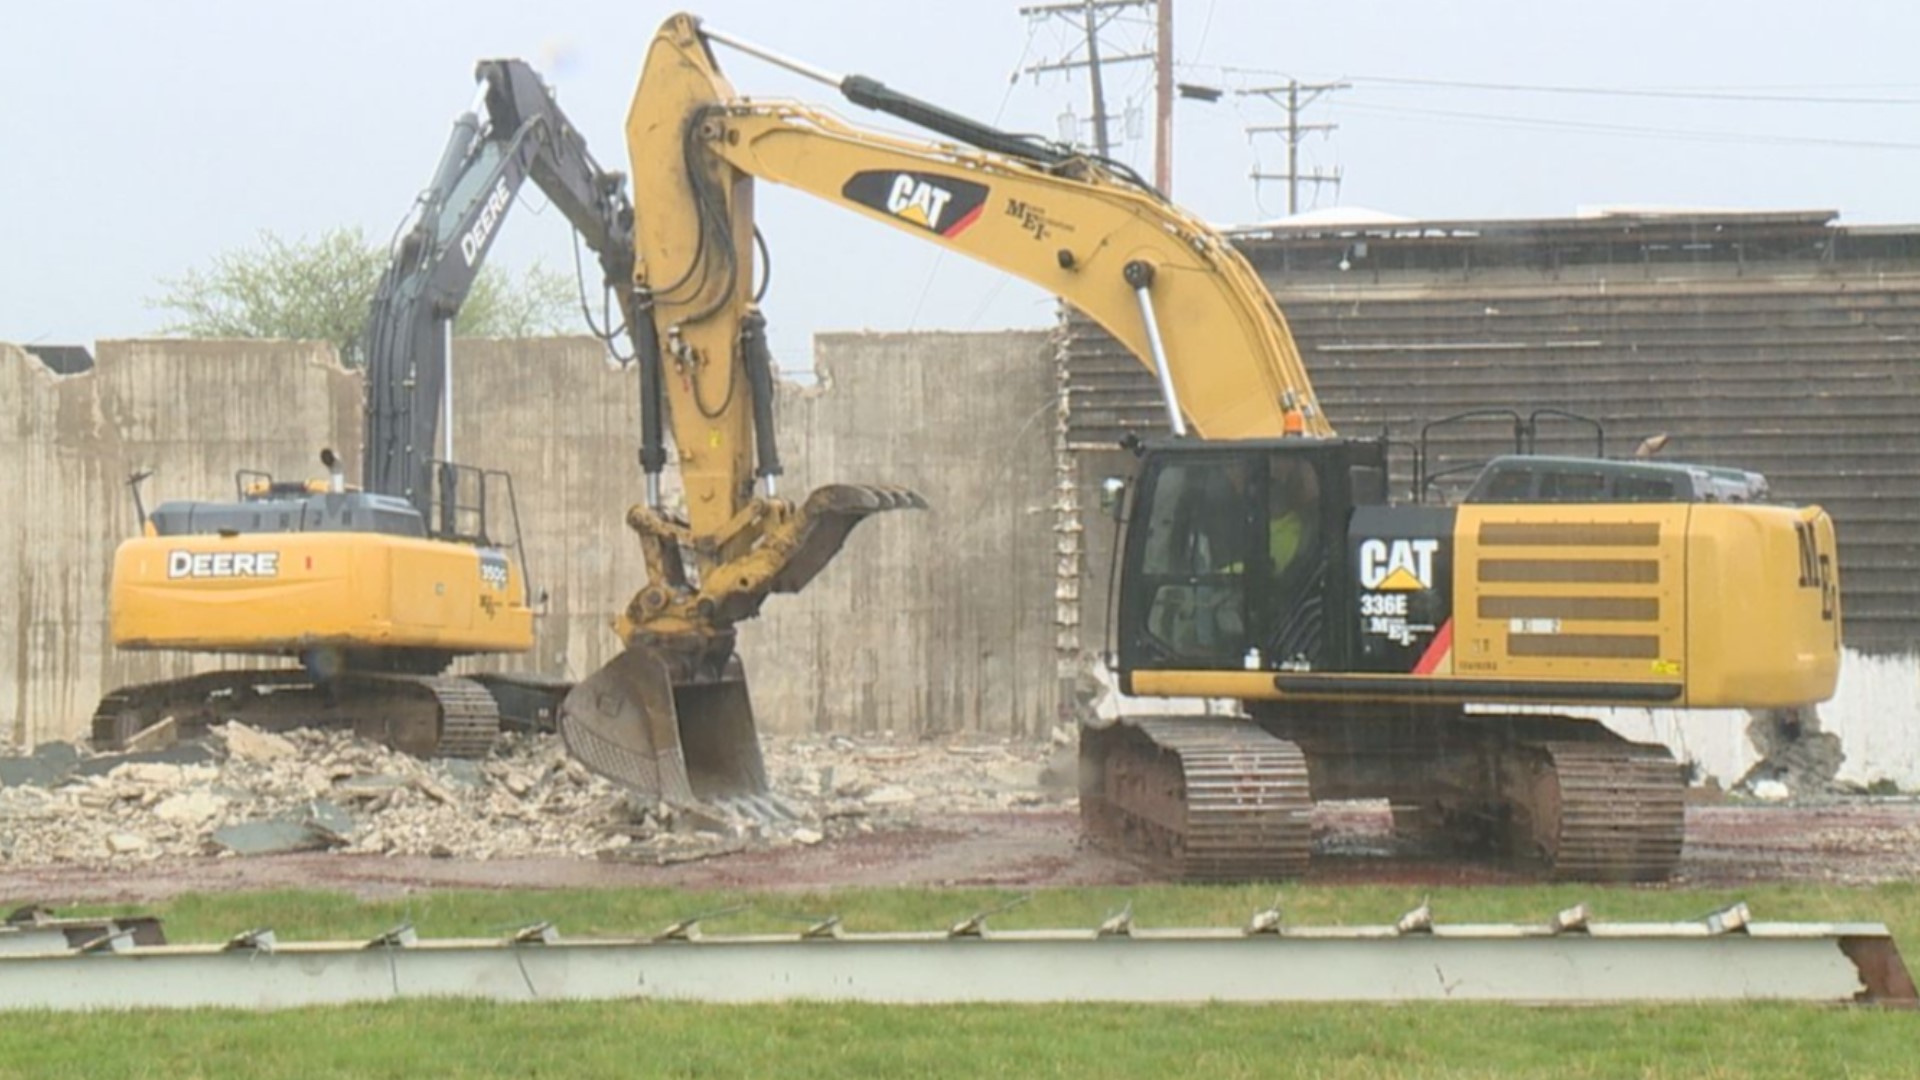 Inch & Co. hopes to break ground on the state-of-the-art complex by the end of this summer.